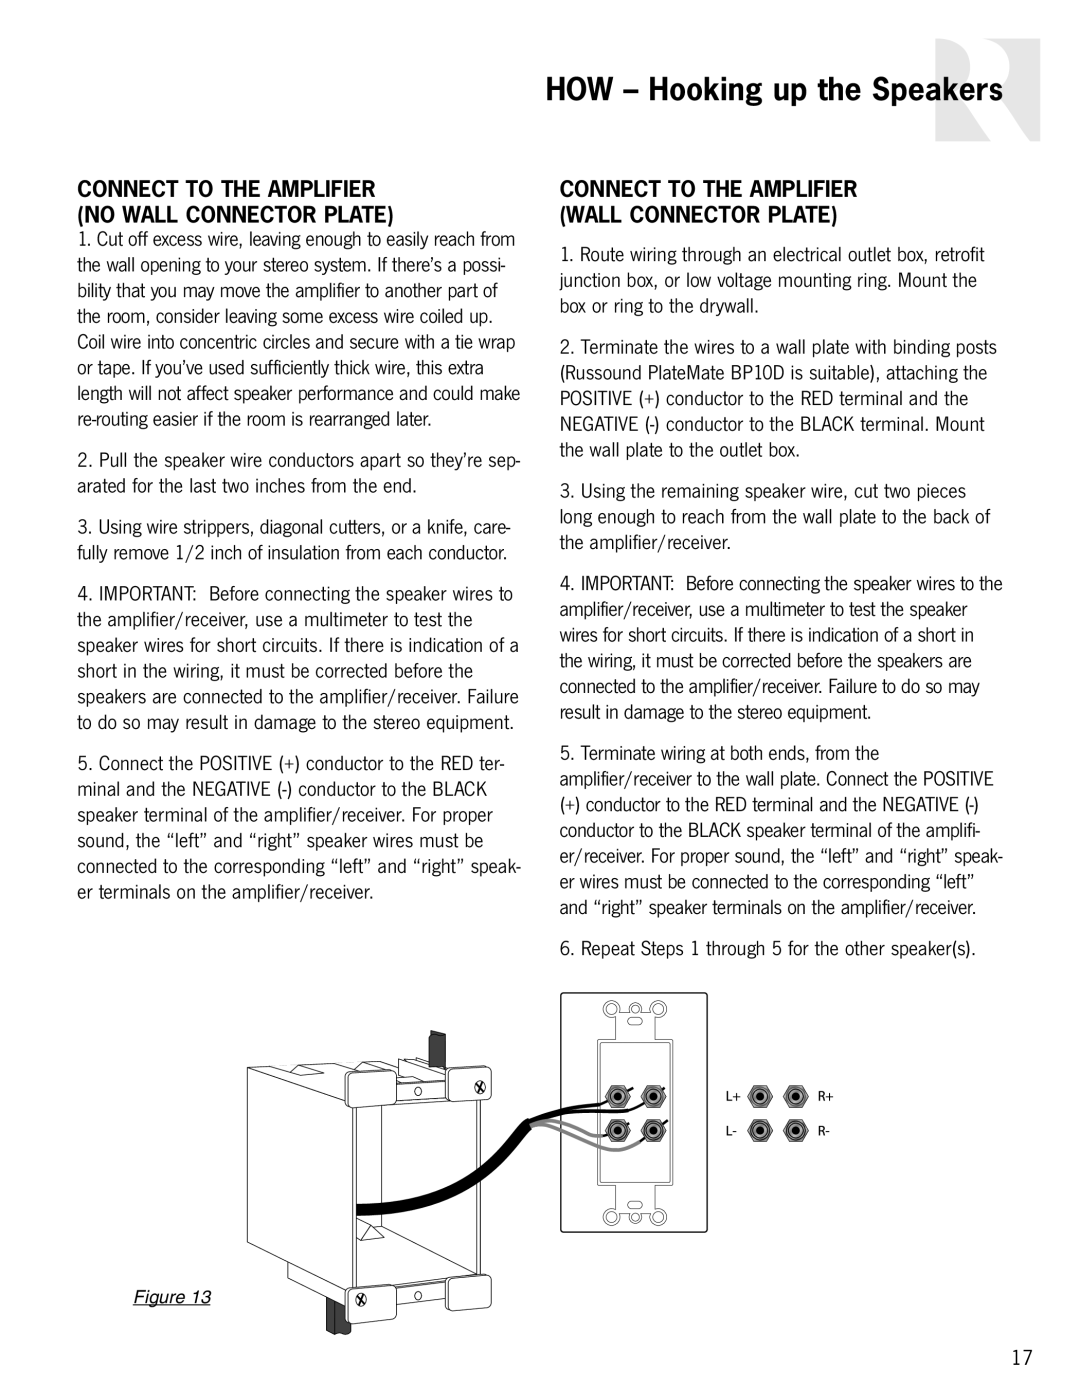 Russound In-Ceiling speaker owner manual HOW - Hooking up the Speakers, Connect To The Amplifier No Wall Connector Plate 